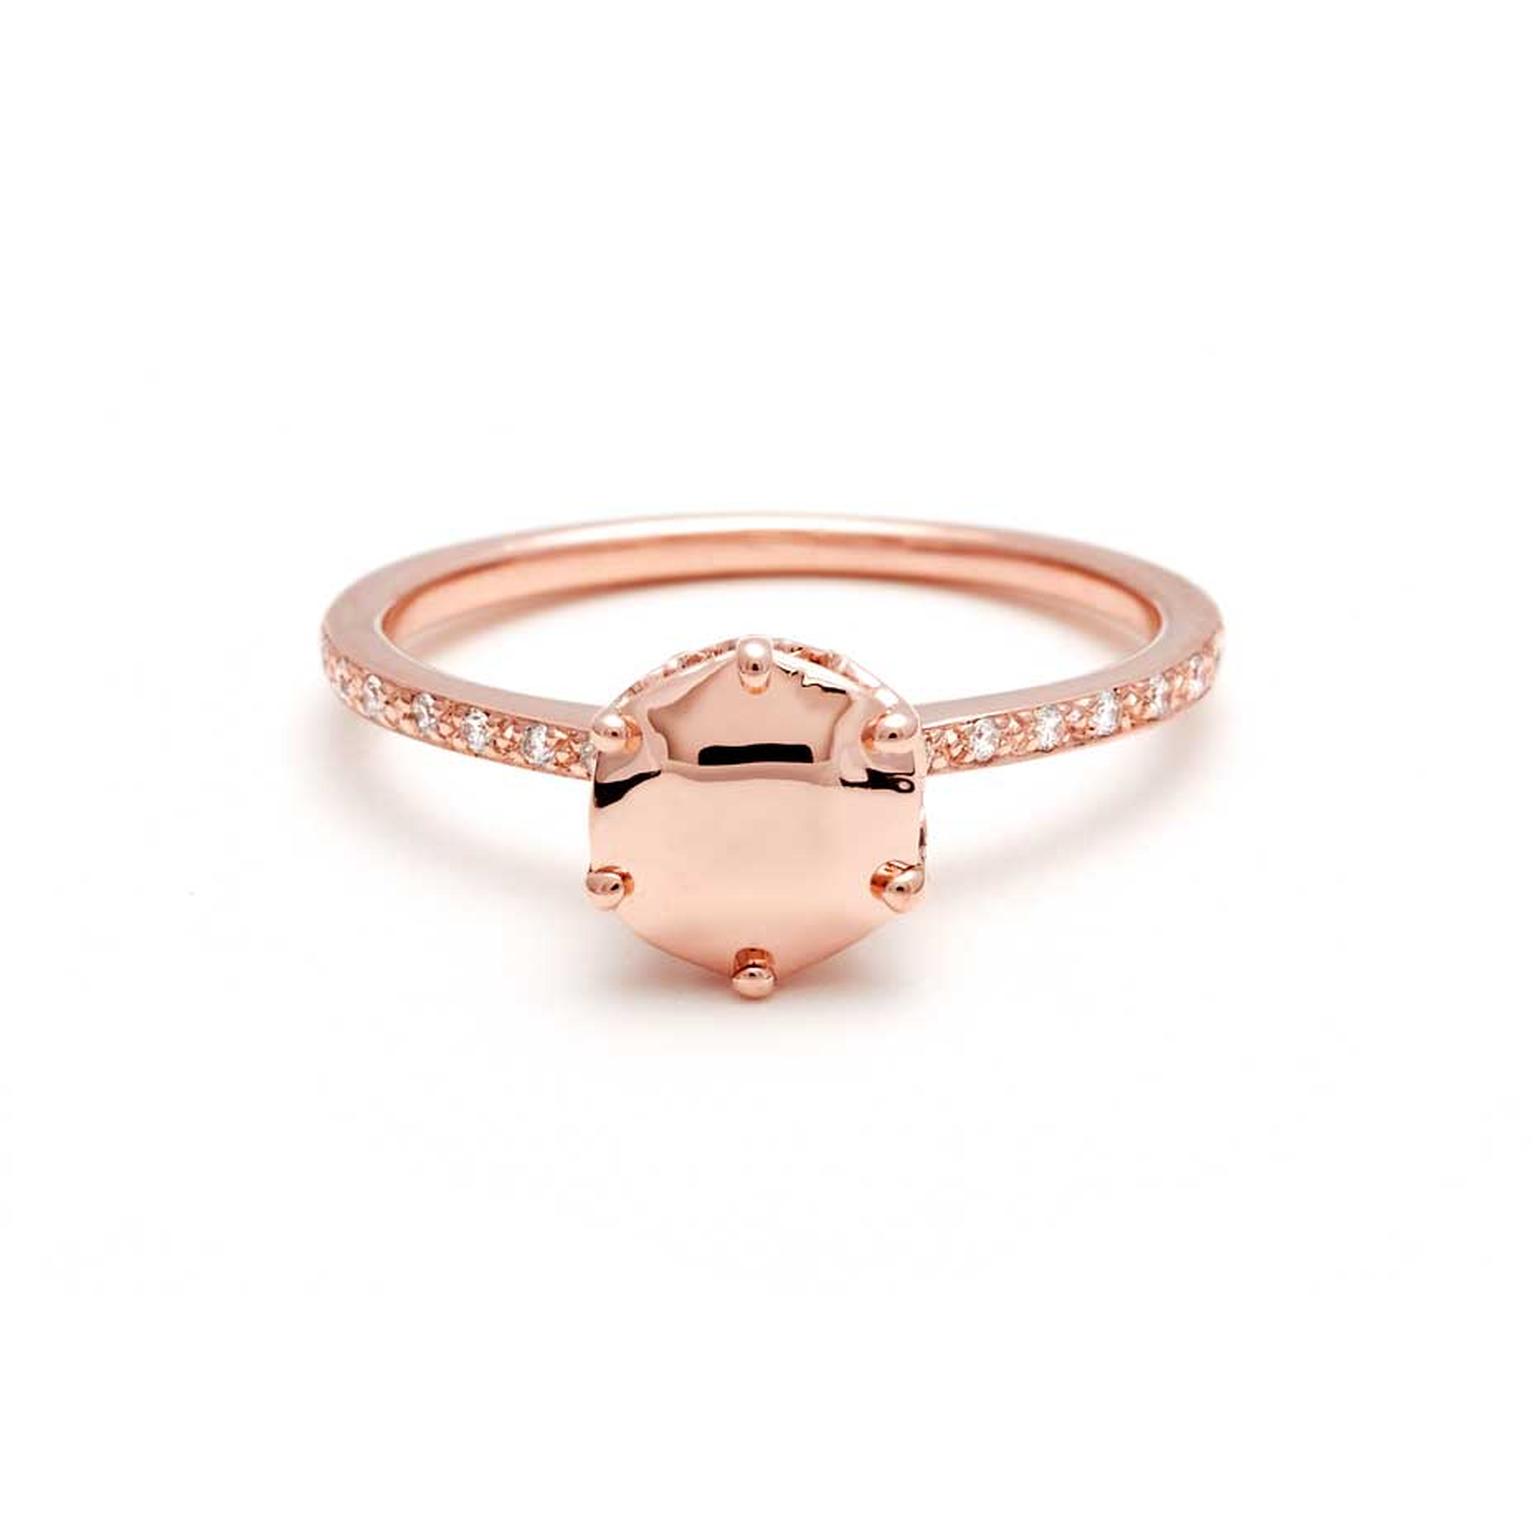 Anna Sheffield's Hazeline solitaire ring in rose gold is also available with a gemstone centre.